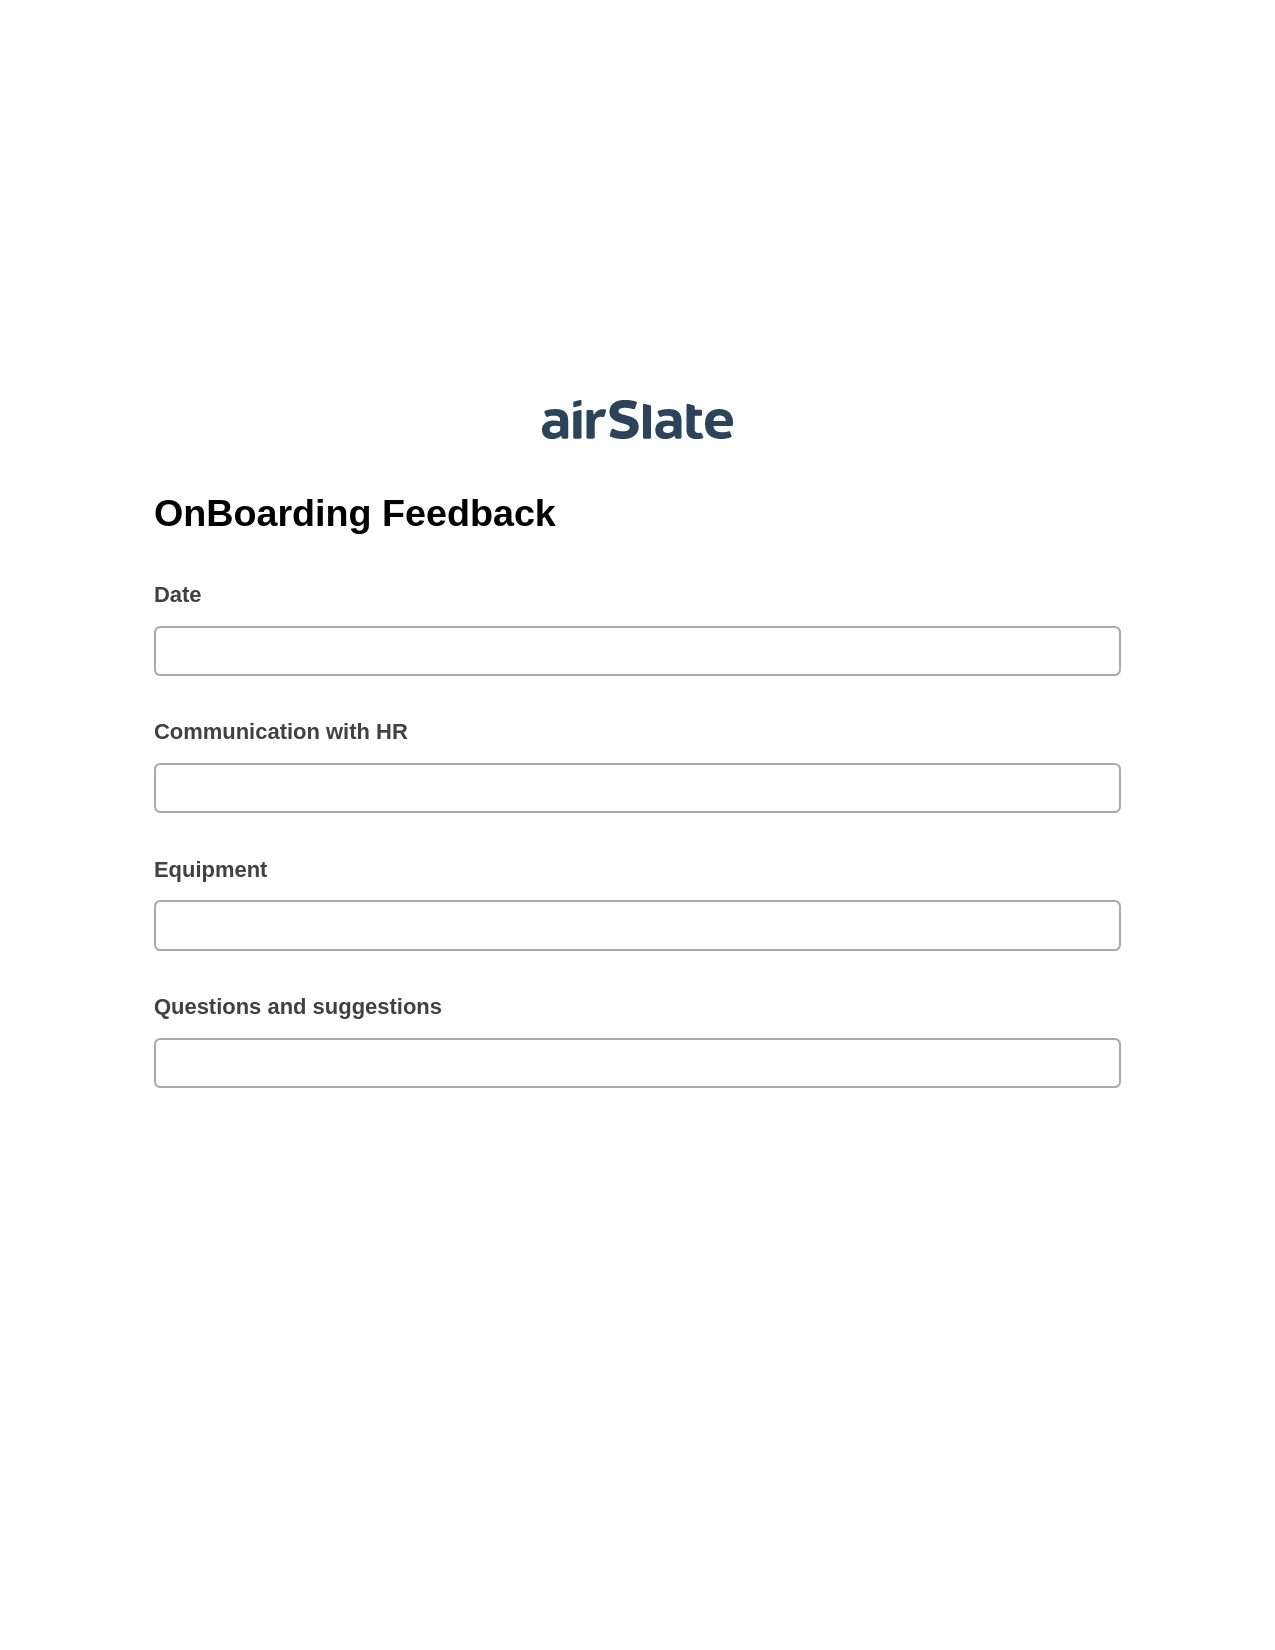 OnBoarding Feedback Pre-fill Document Bot, Roles Reminder Bot, Email Notification Postfinish Bot